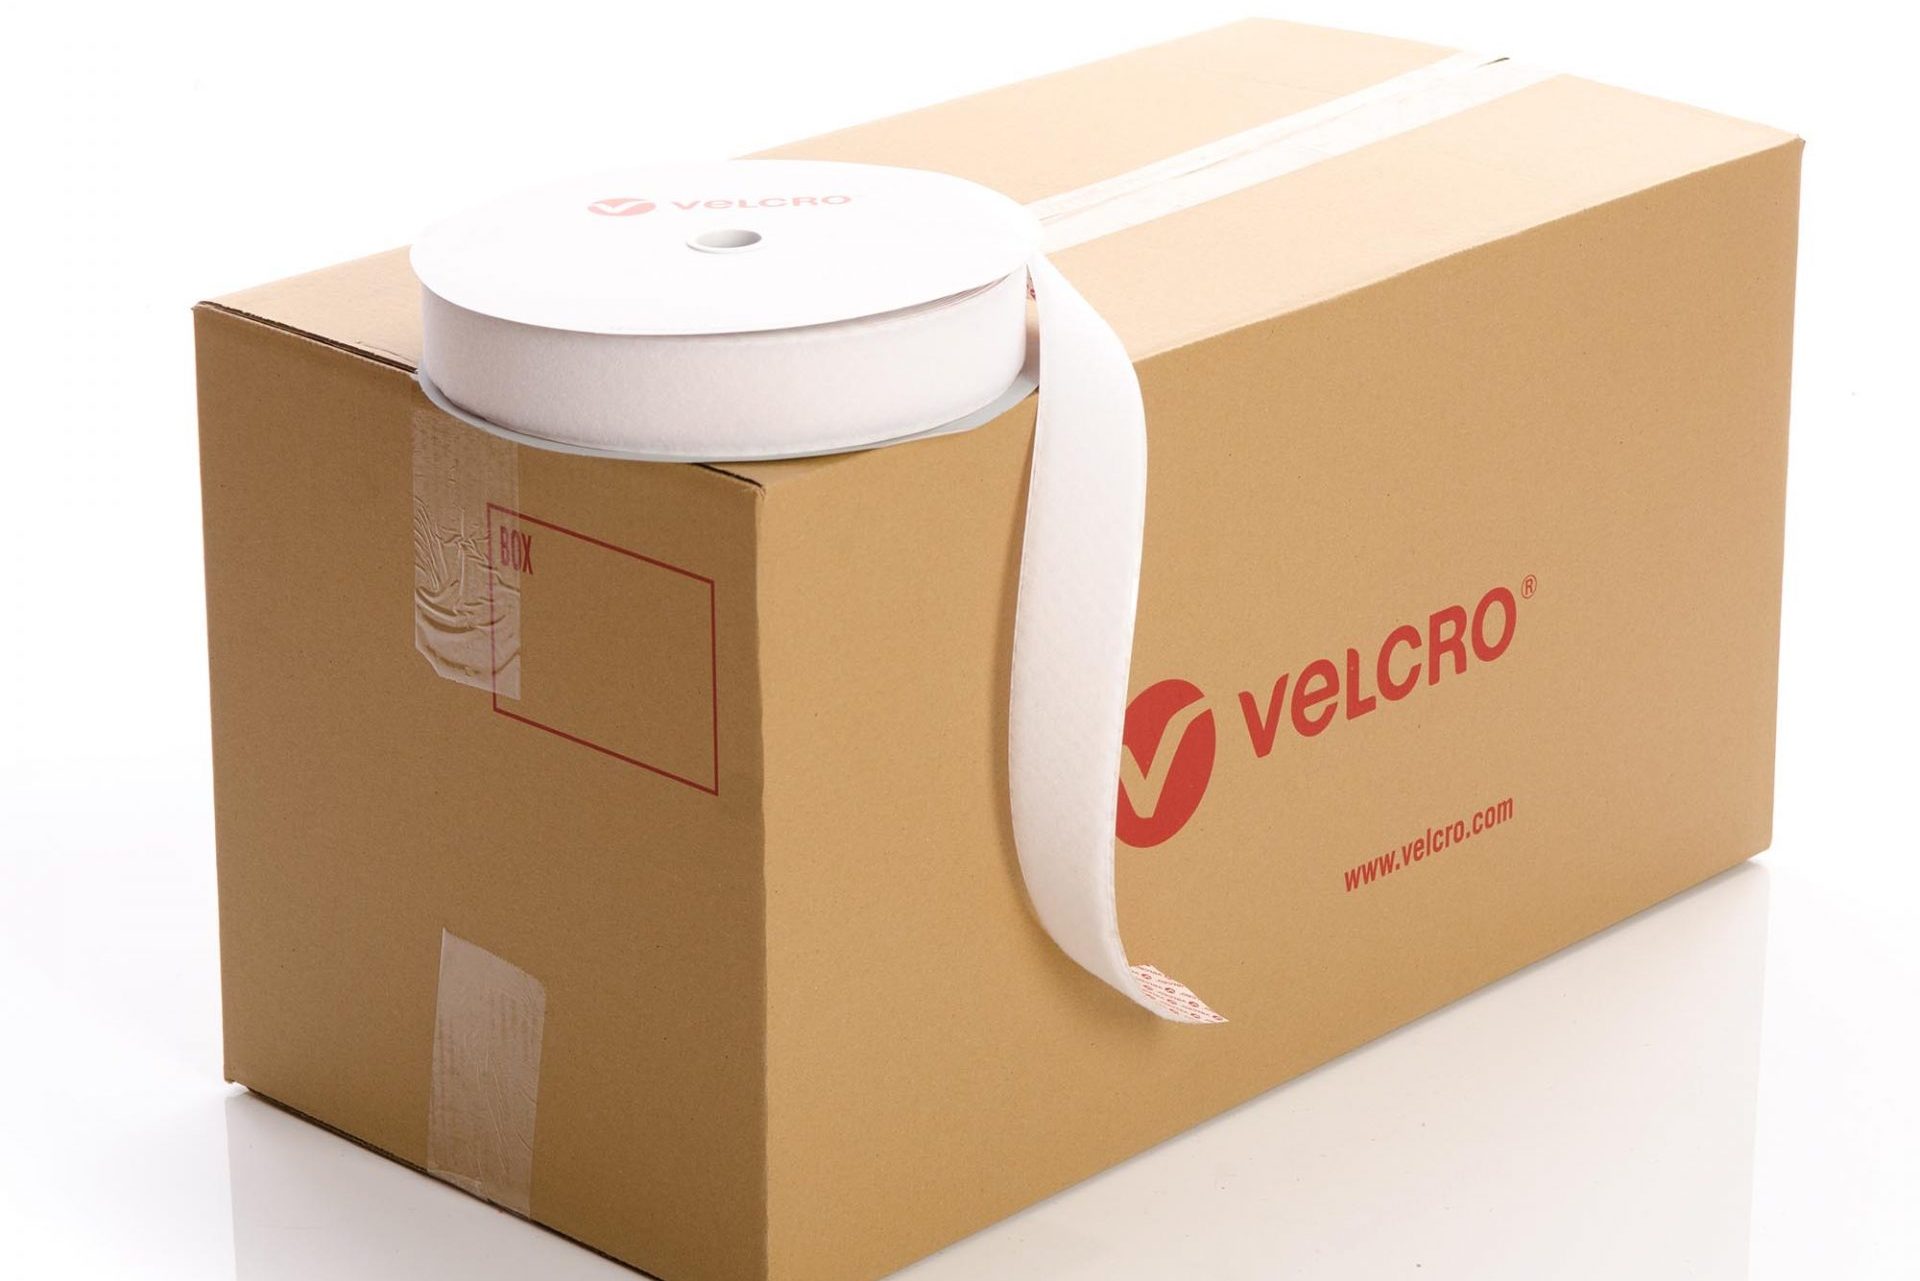 VELCRO® Brand PS14 Stick-on 50mm tape WHITE LOOP case of 21 rolls